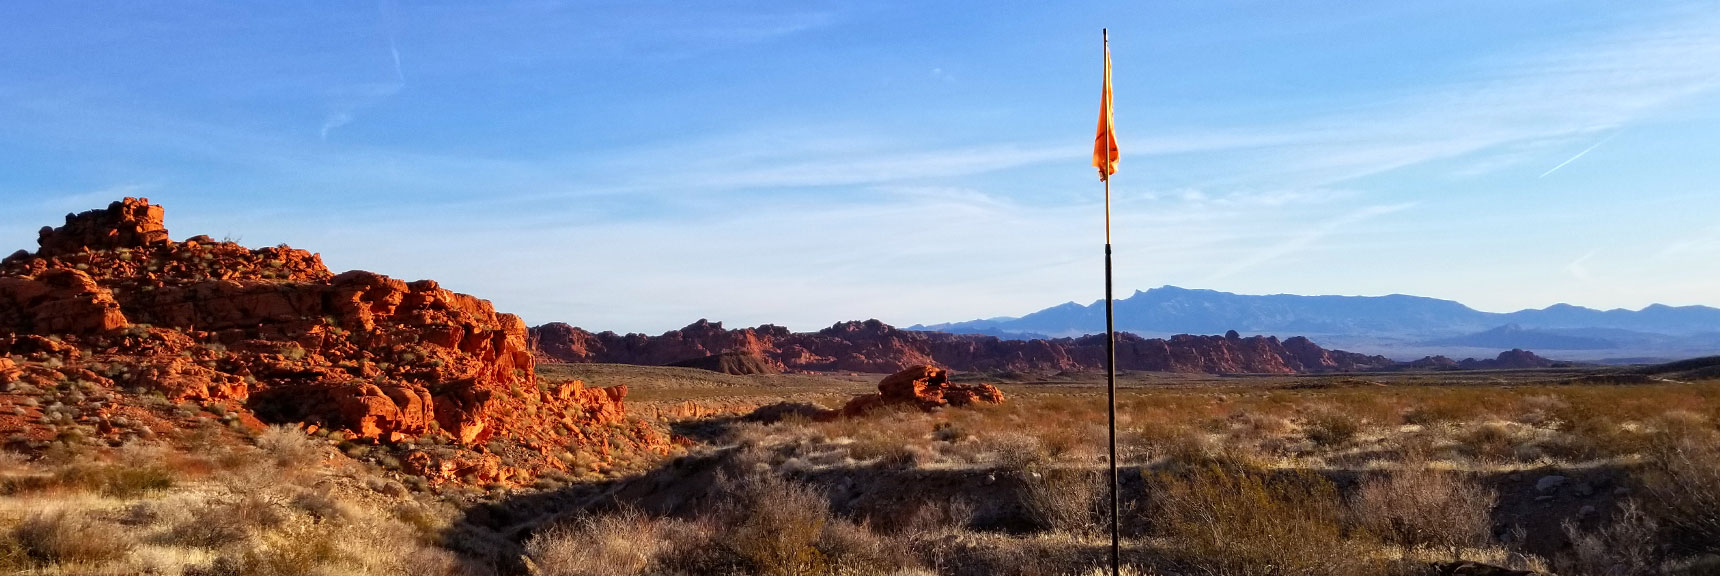 Crossing the First Wash on the Old Arrowhead Trail in Valley of Fire State Park, Nevada